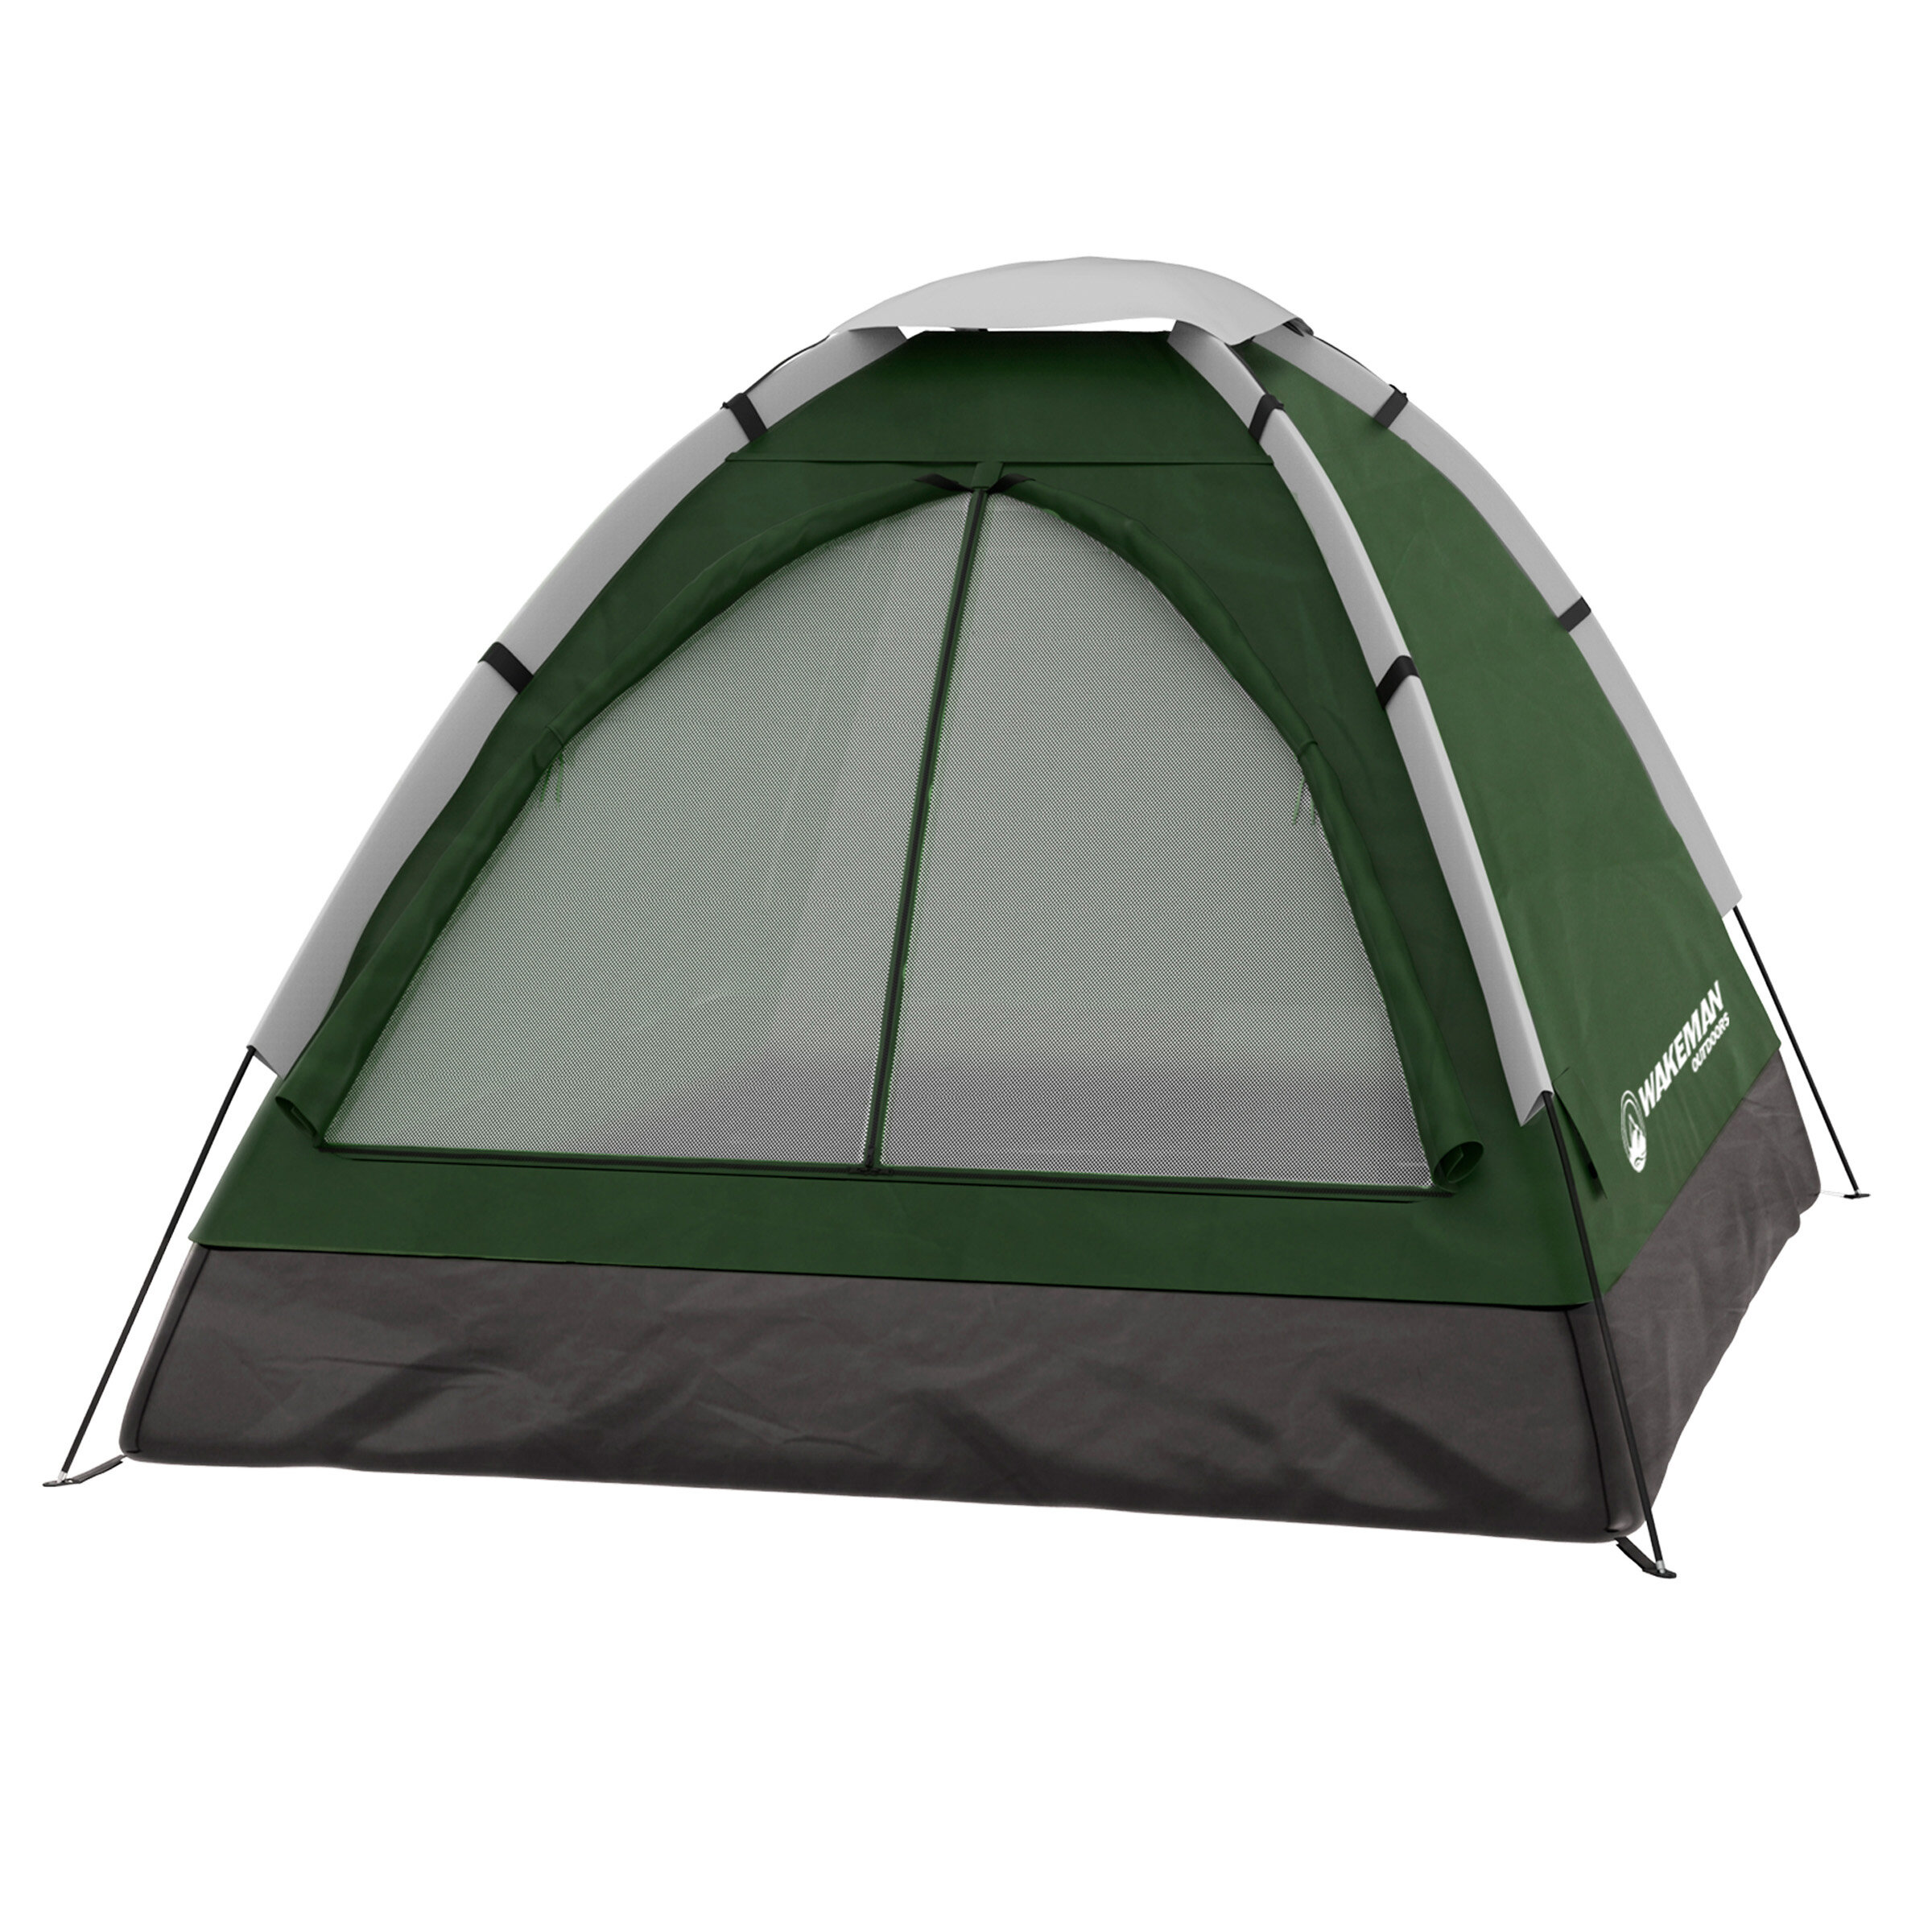 Wakeman Outdoors 2 Person Tent